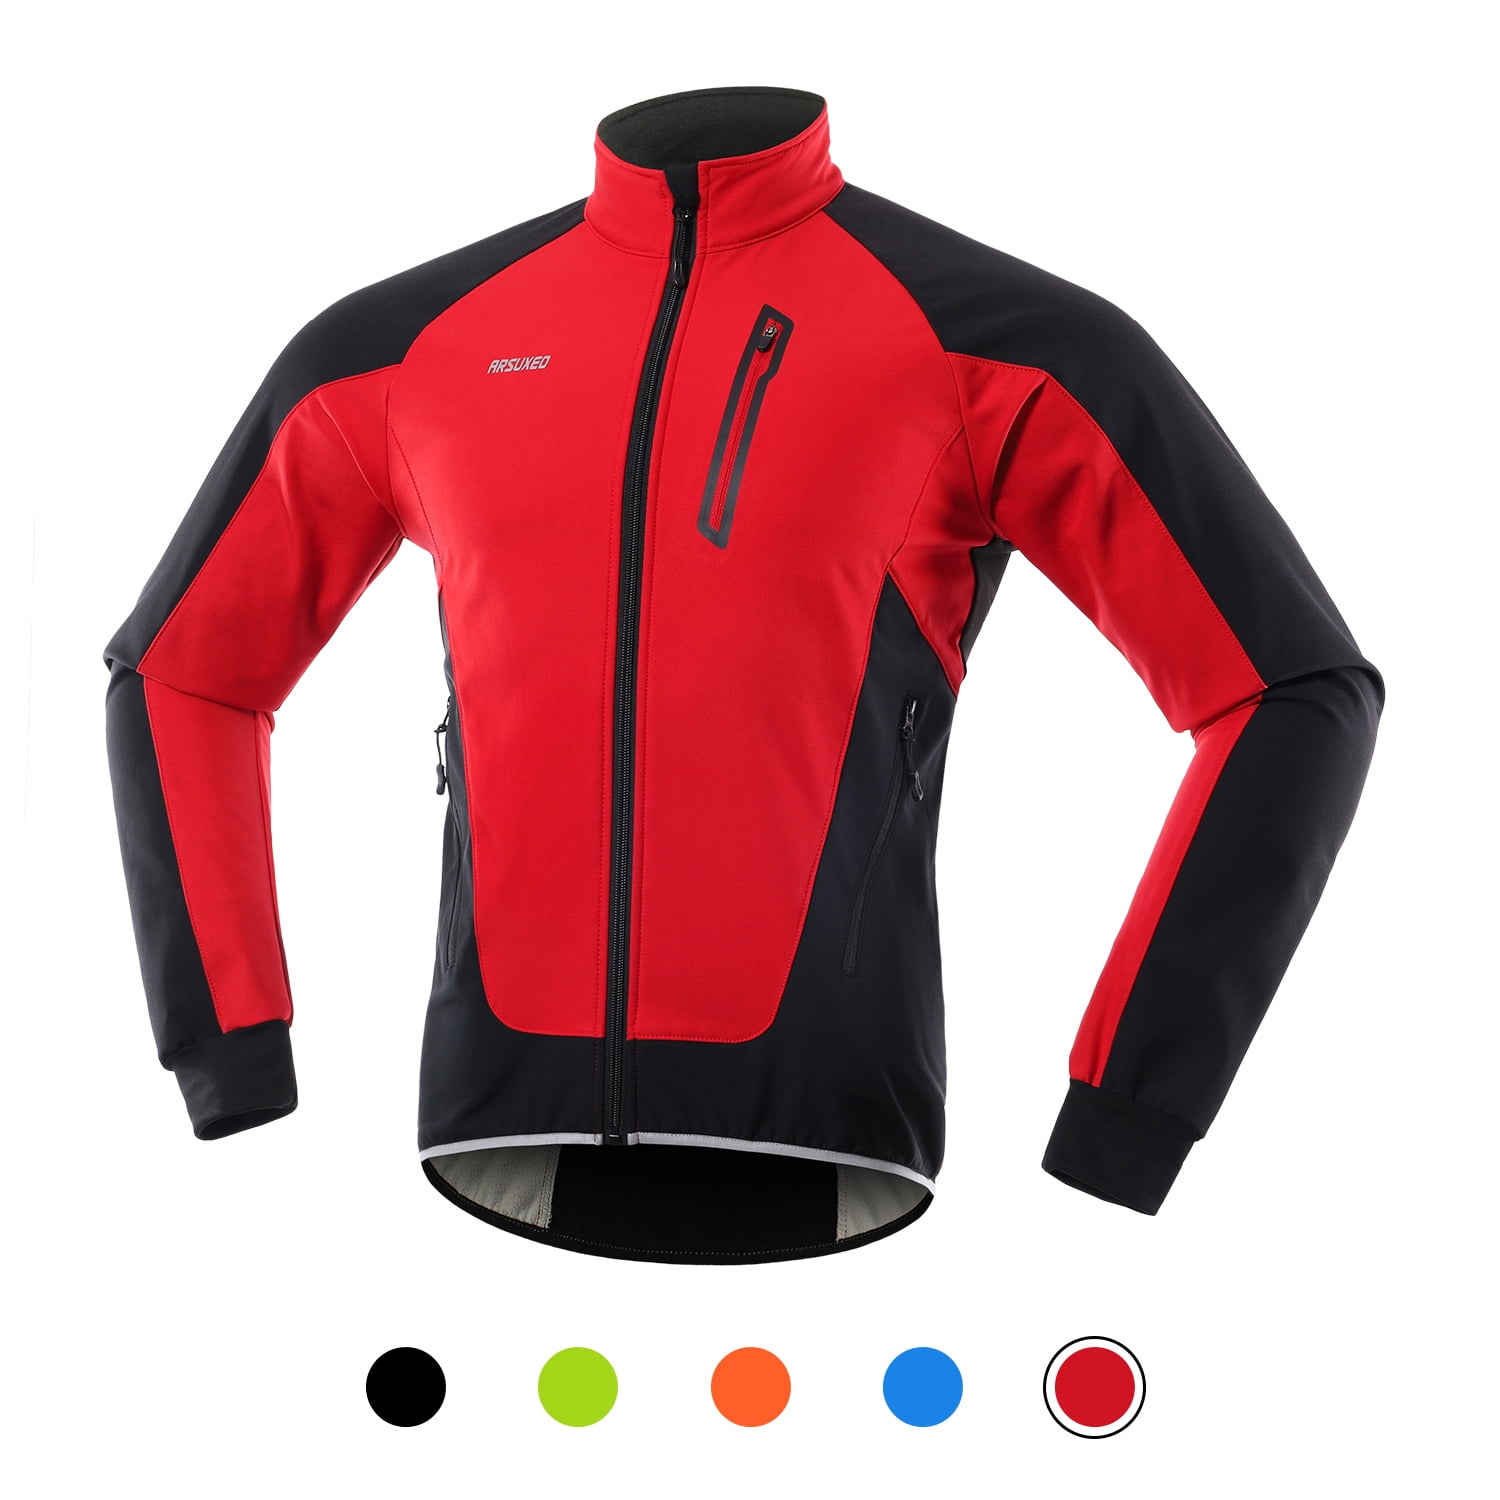 Mens Cycling Jacket Lightweight Fleece Cycling Coat Keep Warm Reflective for Motorbike Racing Riding,Red,S